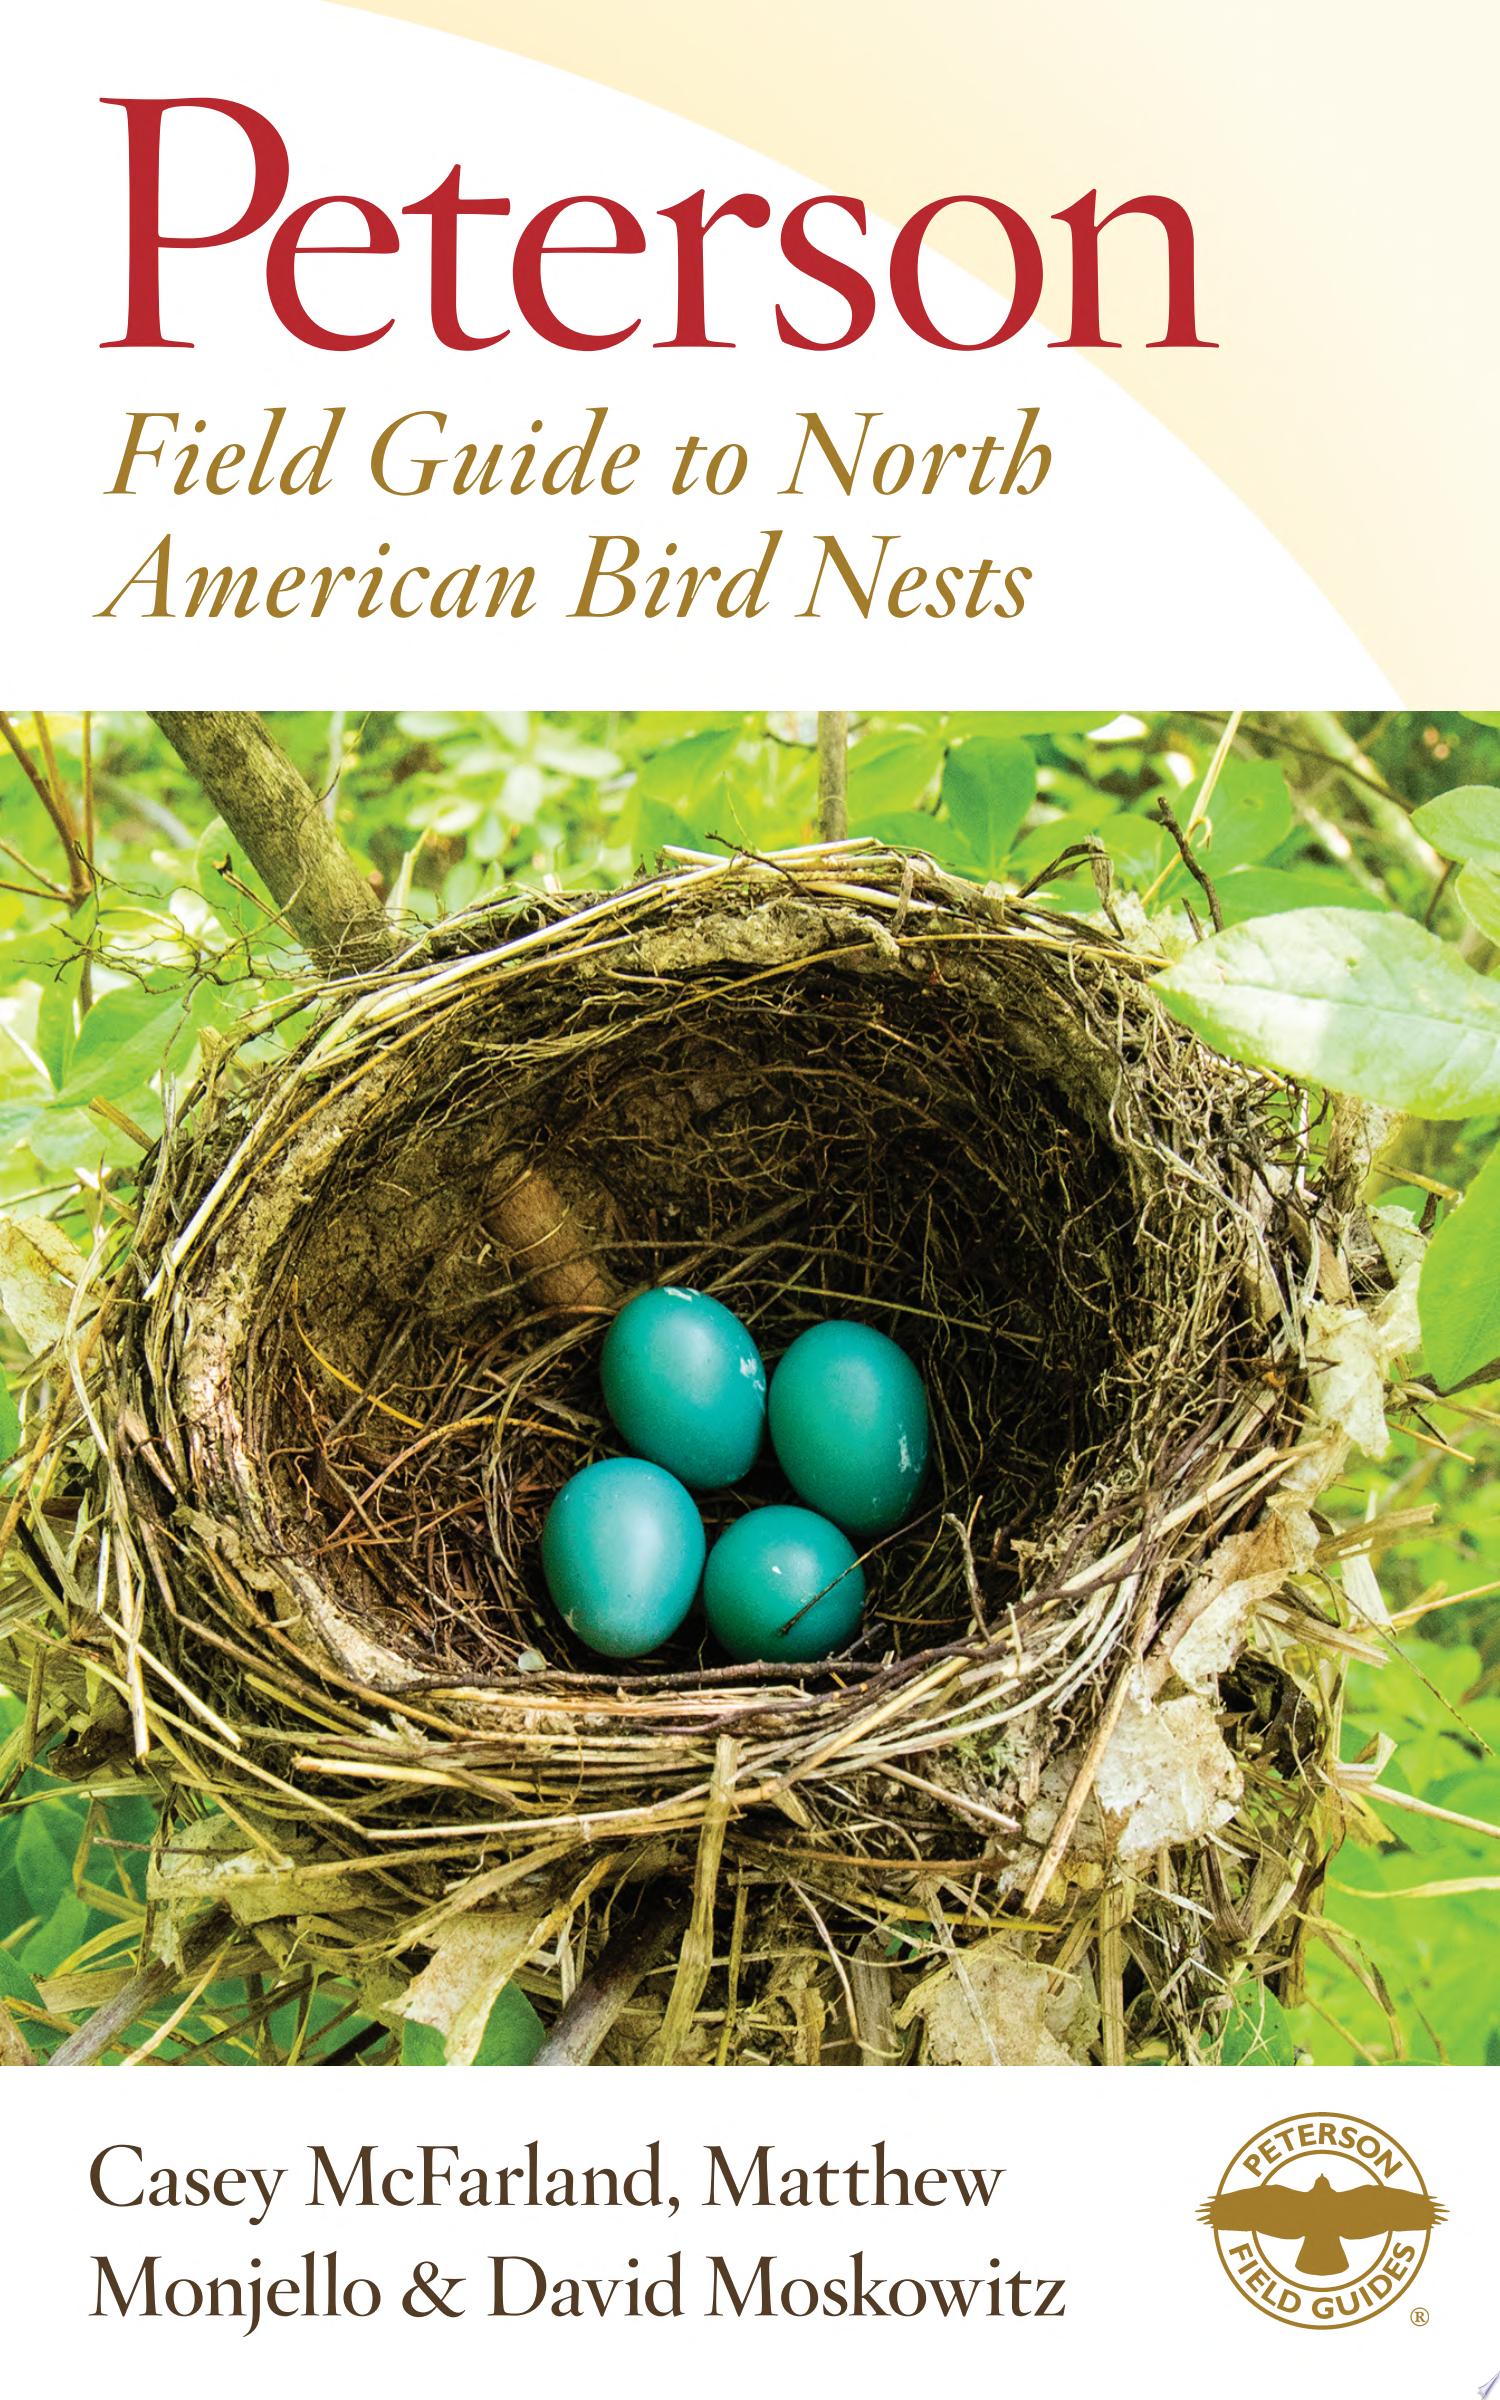 Image for "Peterson Field Guide to North American Bird Nests"